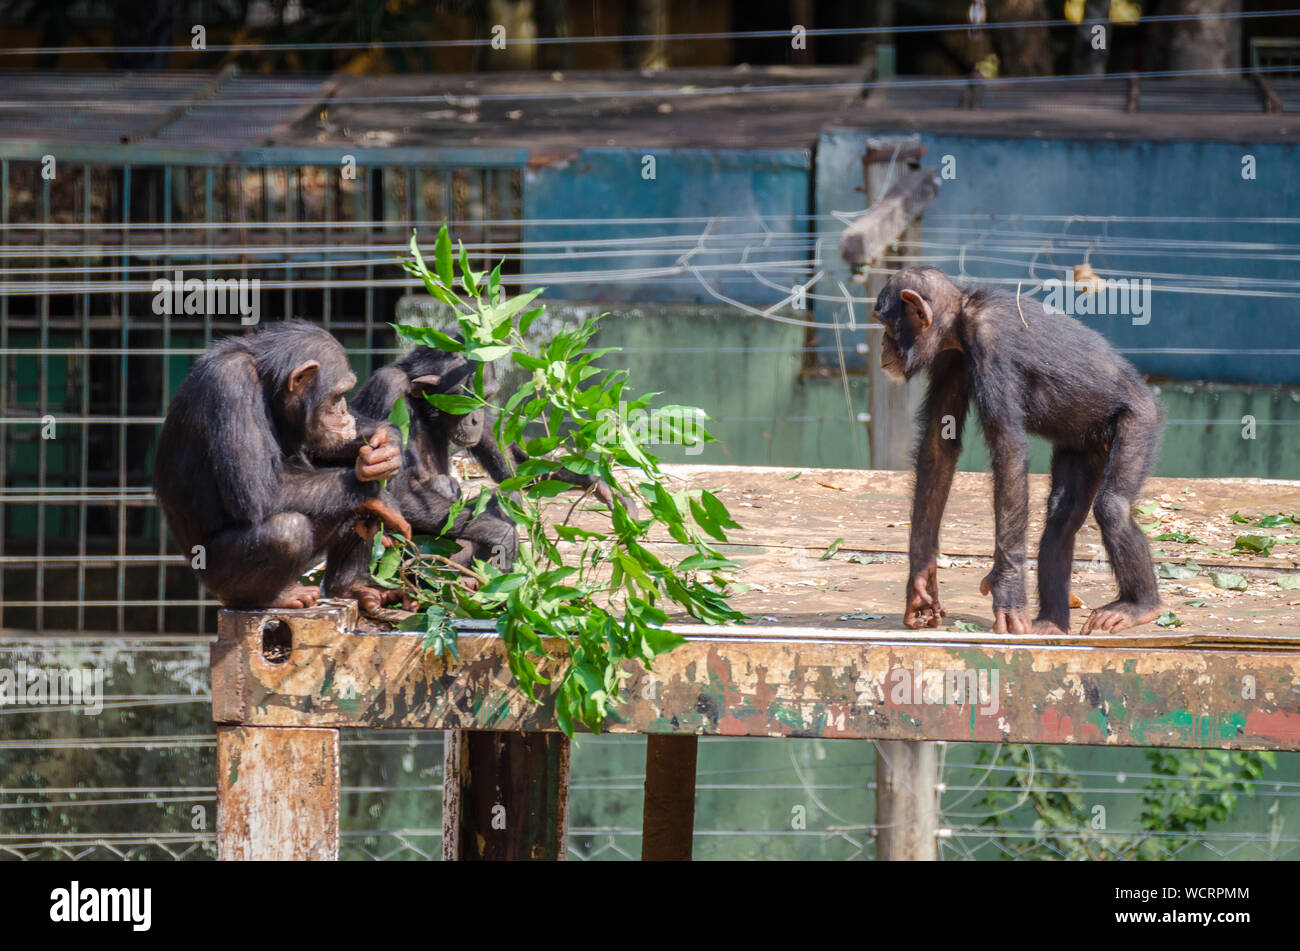 Group Of Chimpanzee Sitting In Front Of Metal Fence Eating Leaves, Sierra Leone, Africa Stock Photo